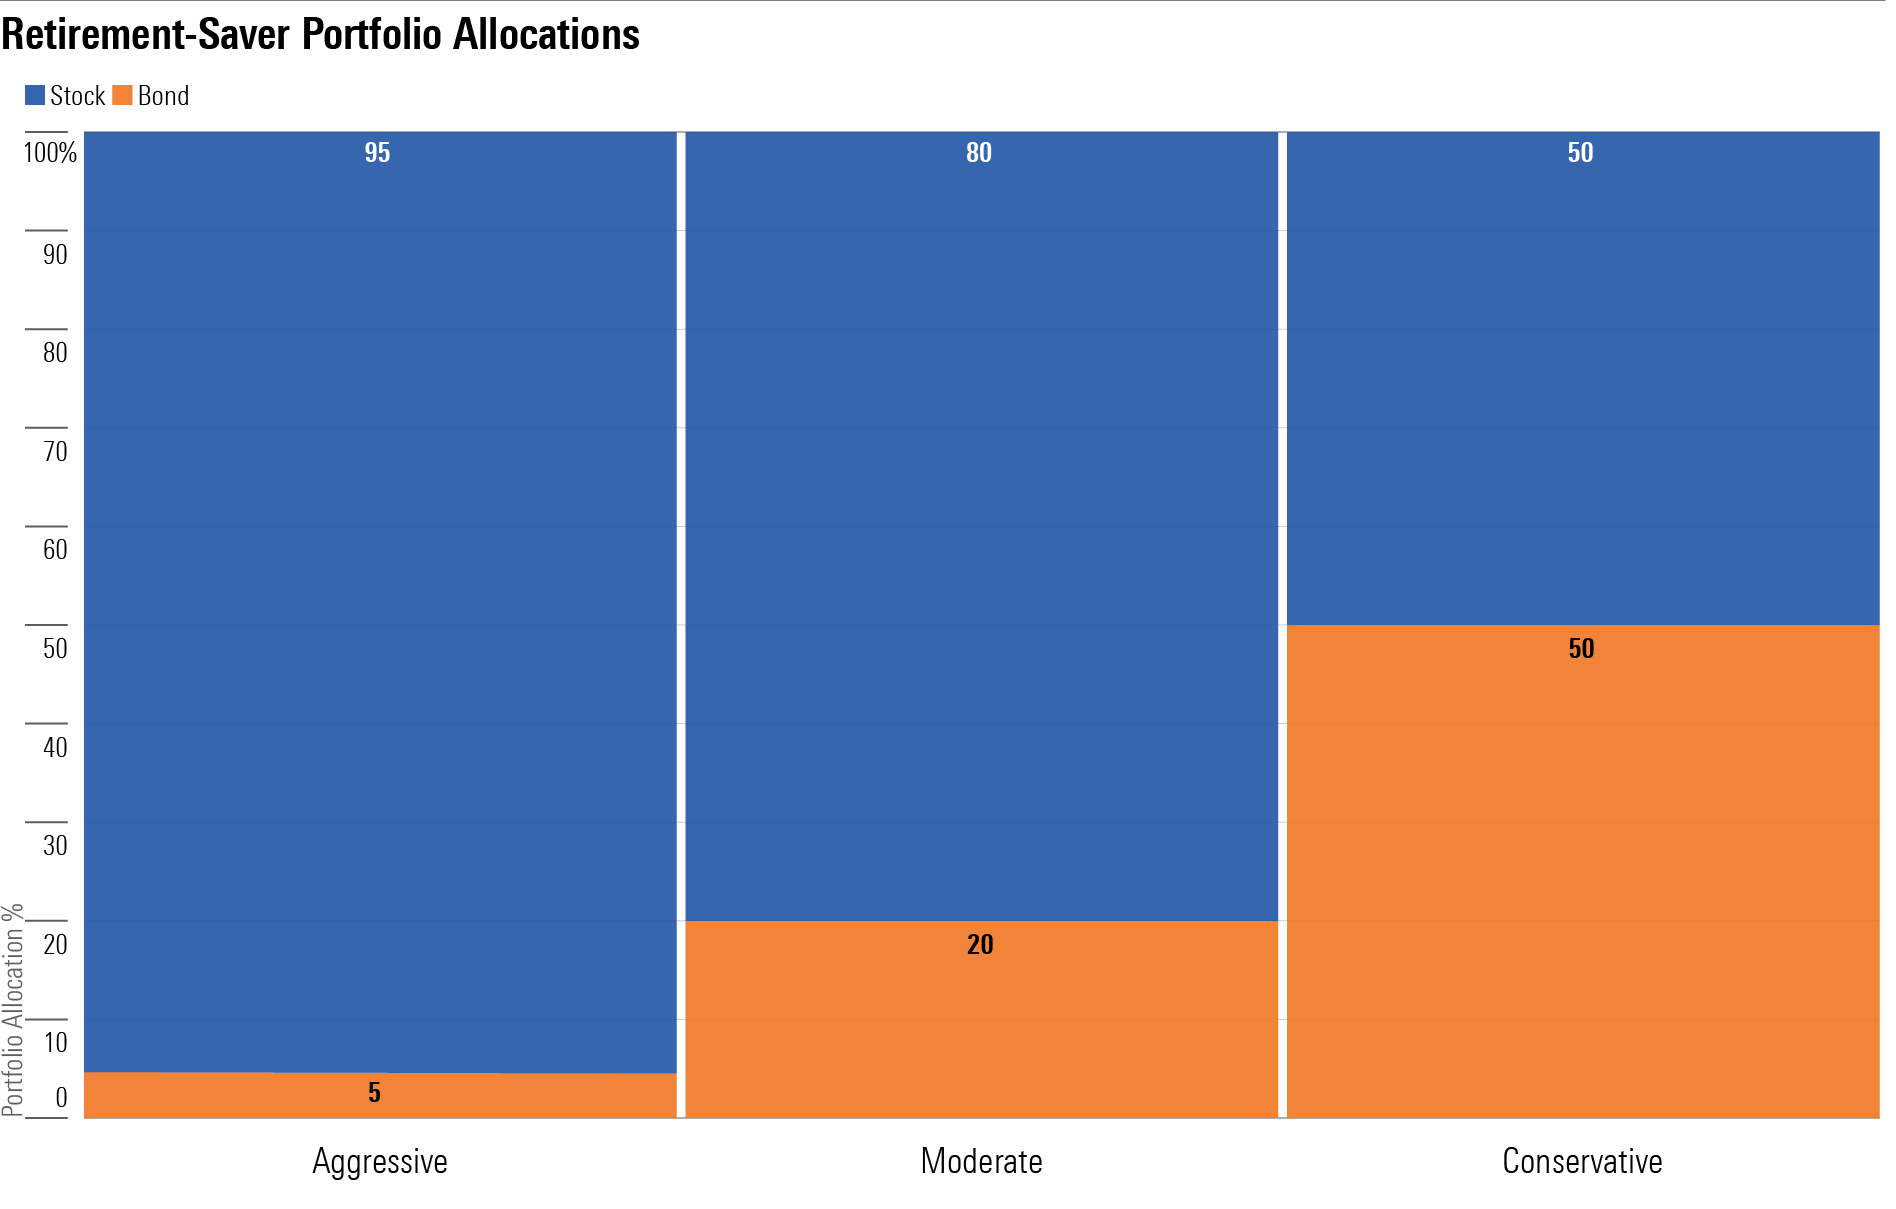 A bar chart of the stock/bond mixes for the aggressive, moderate, and conservative retirement-saver mututal fund portfolios.